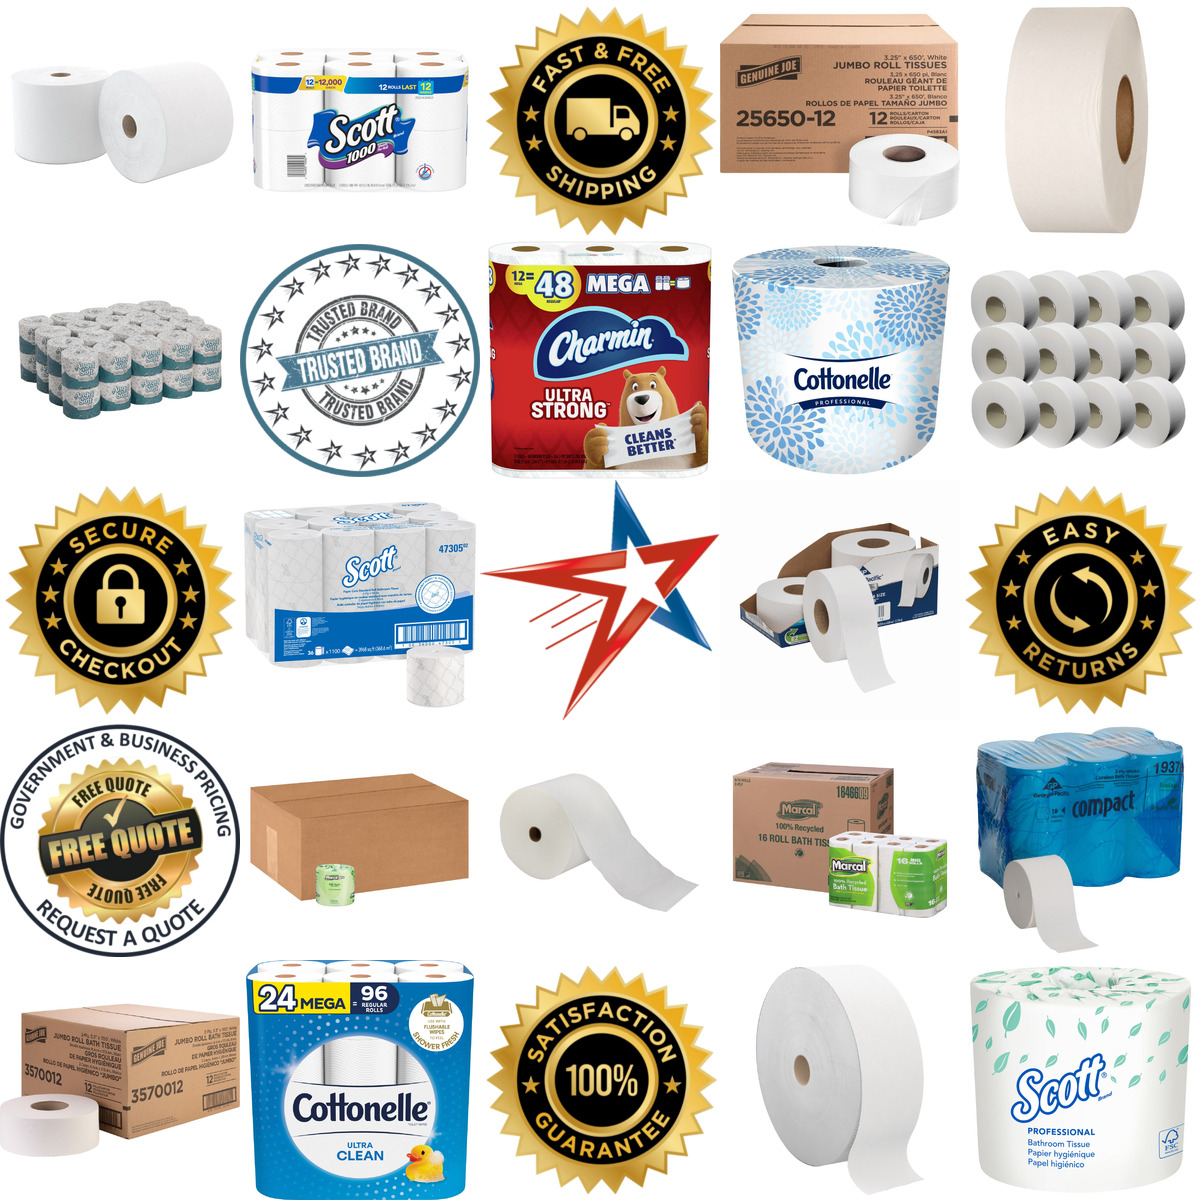 A selection of Toilet Paper products on GoVets